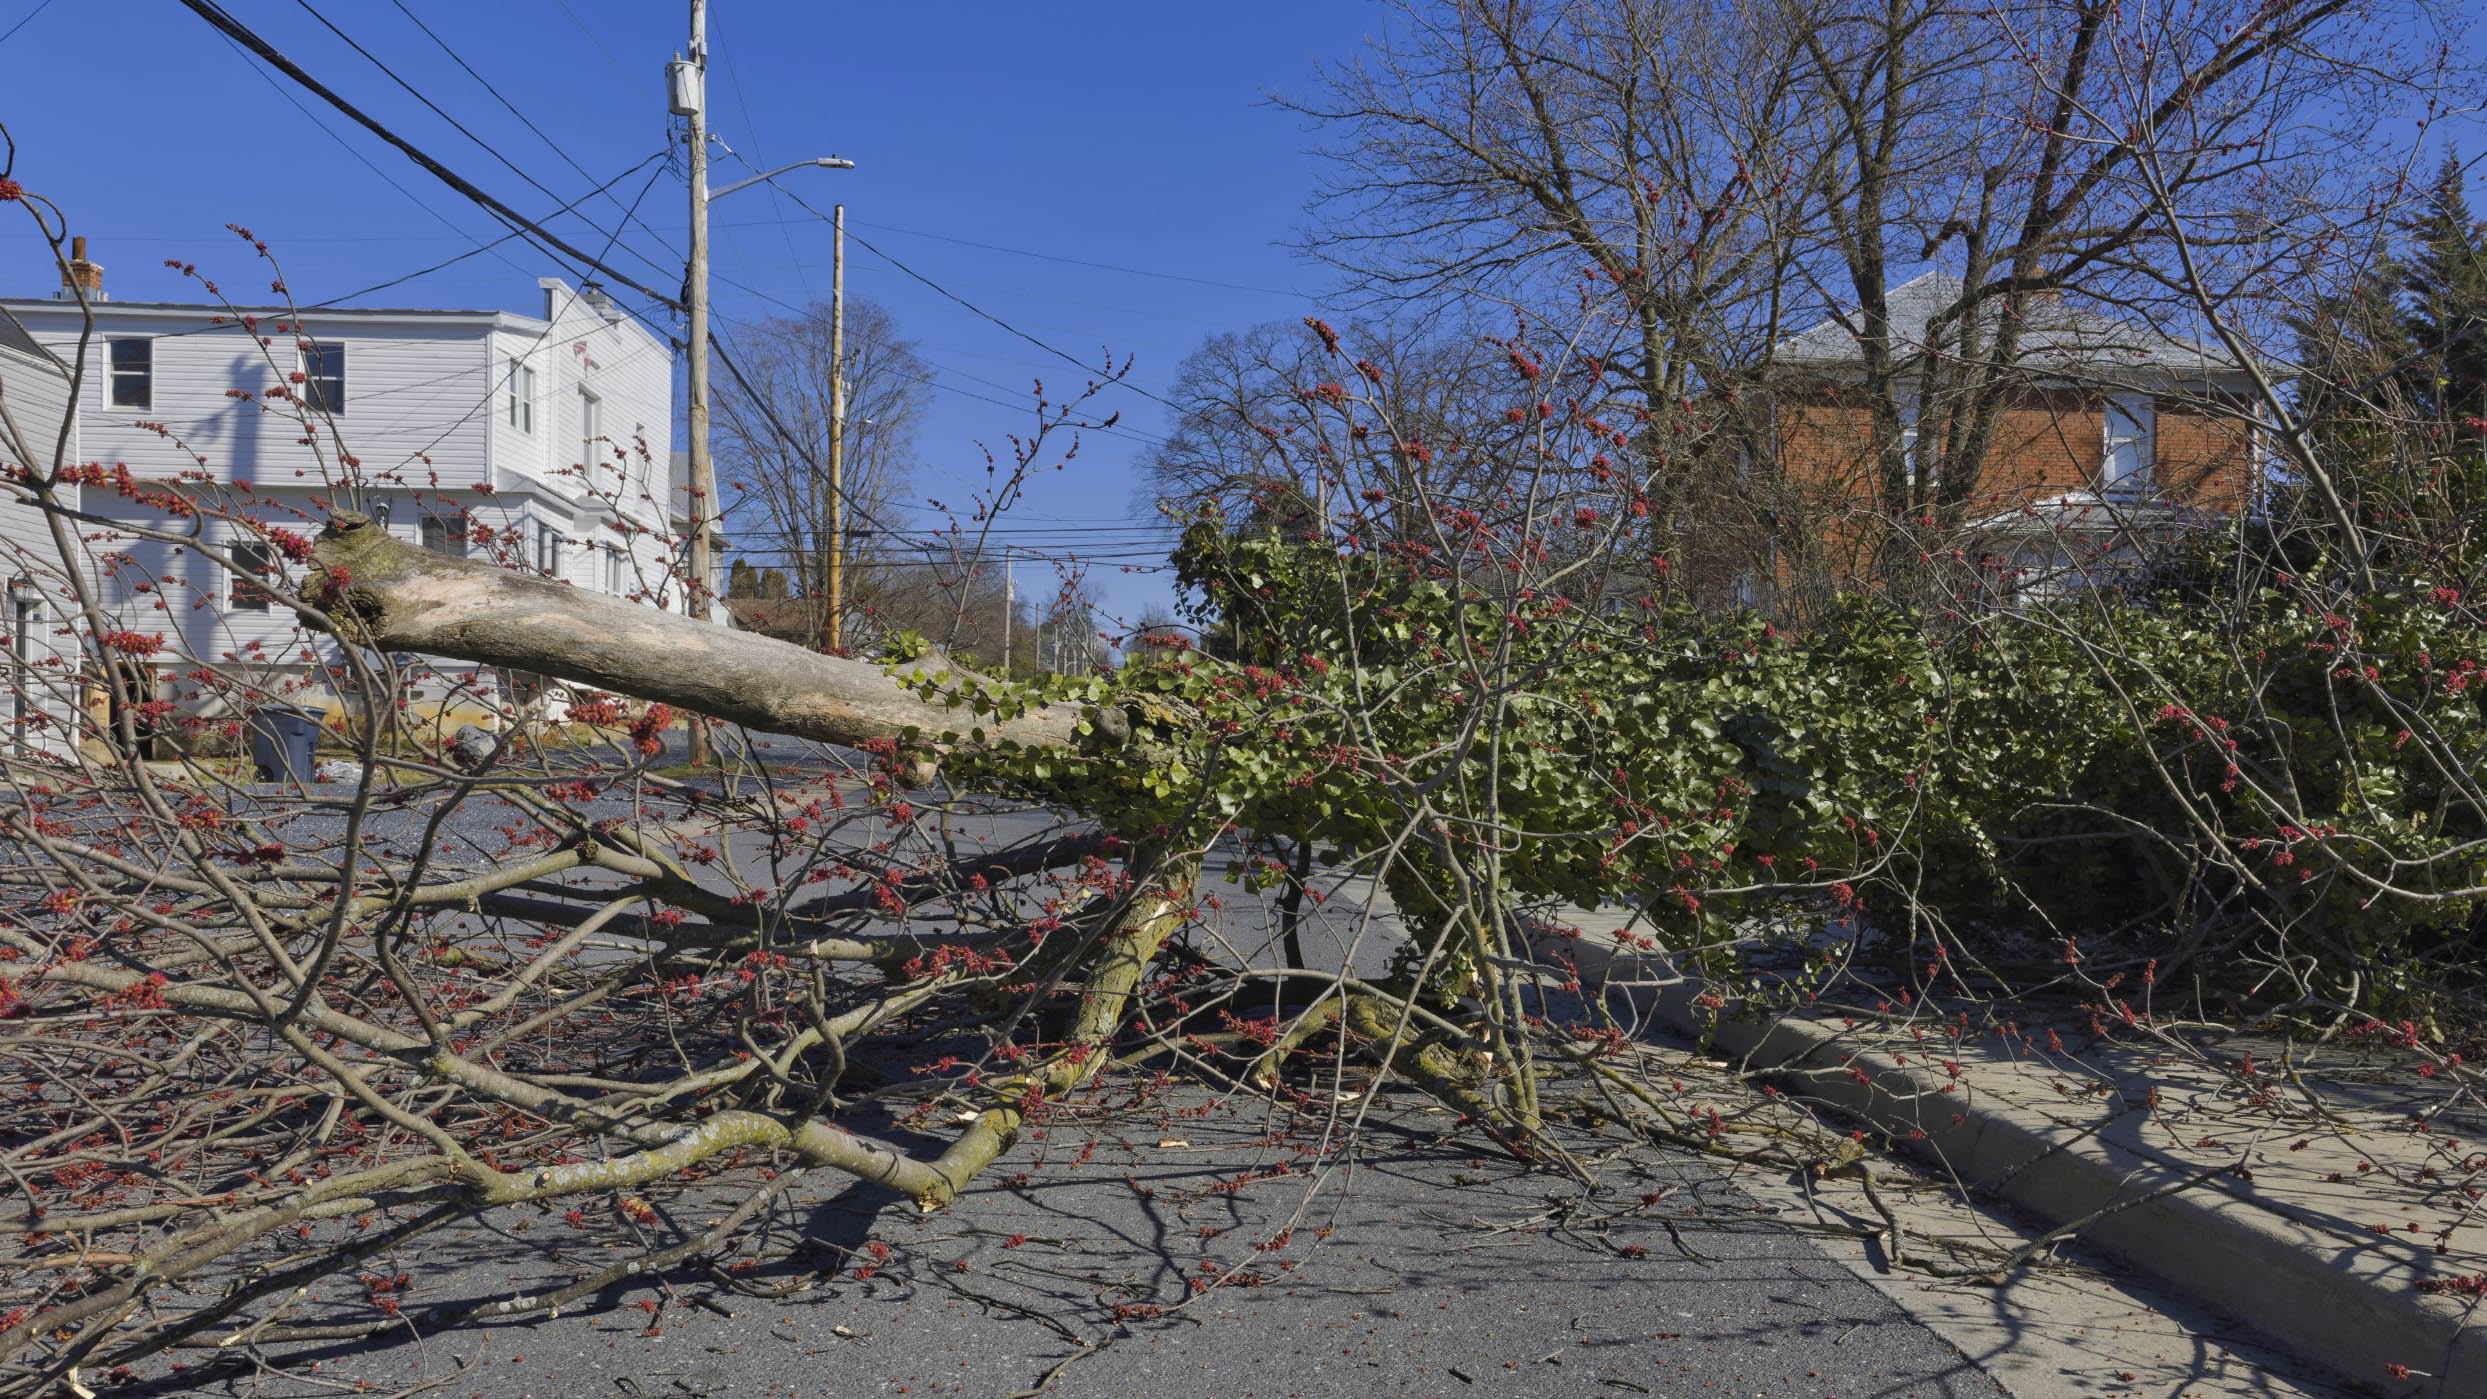 A fallen tree on a Virginia road after a storm. (Image via Shutterstock)